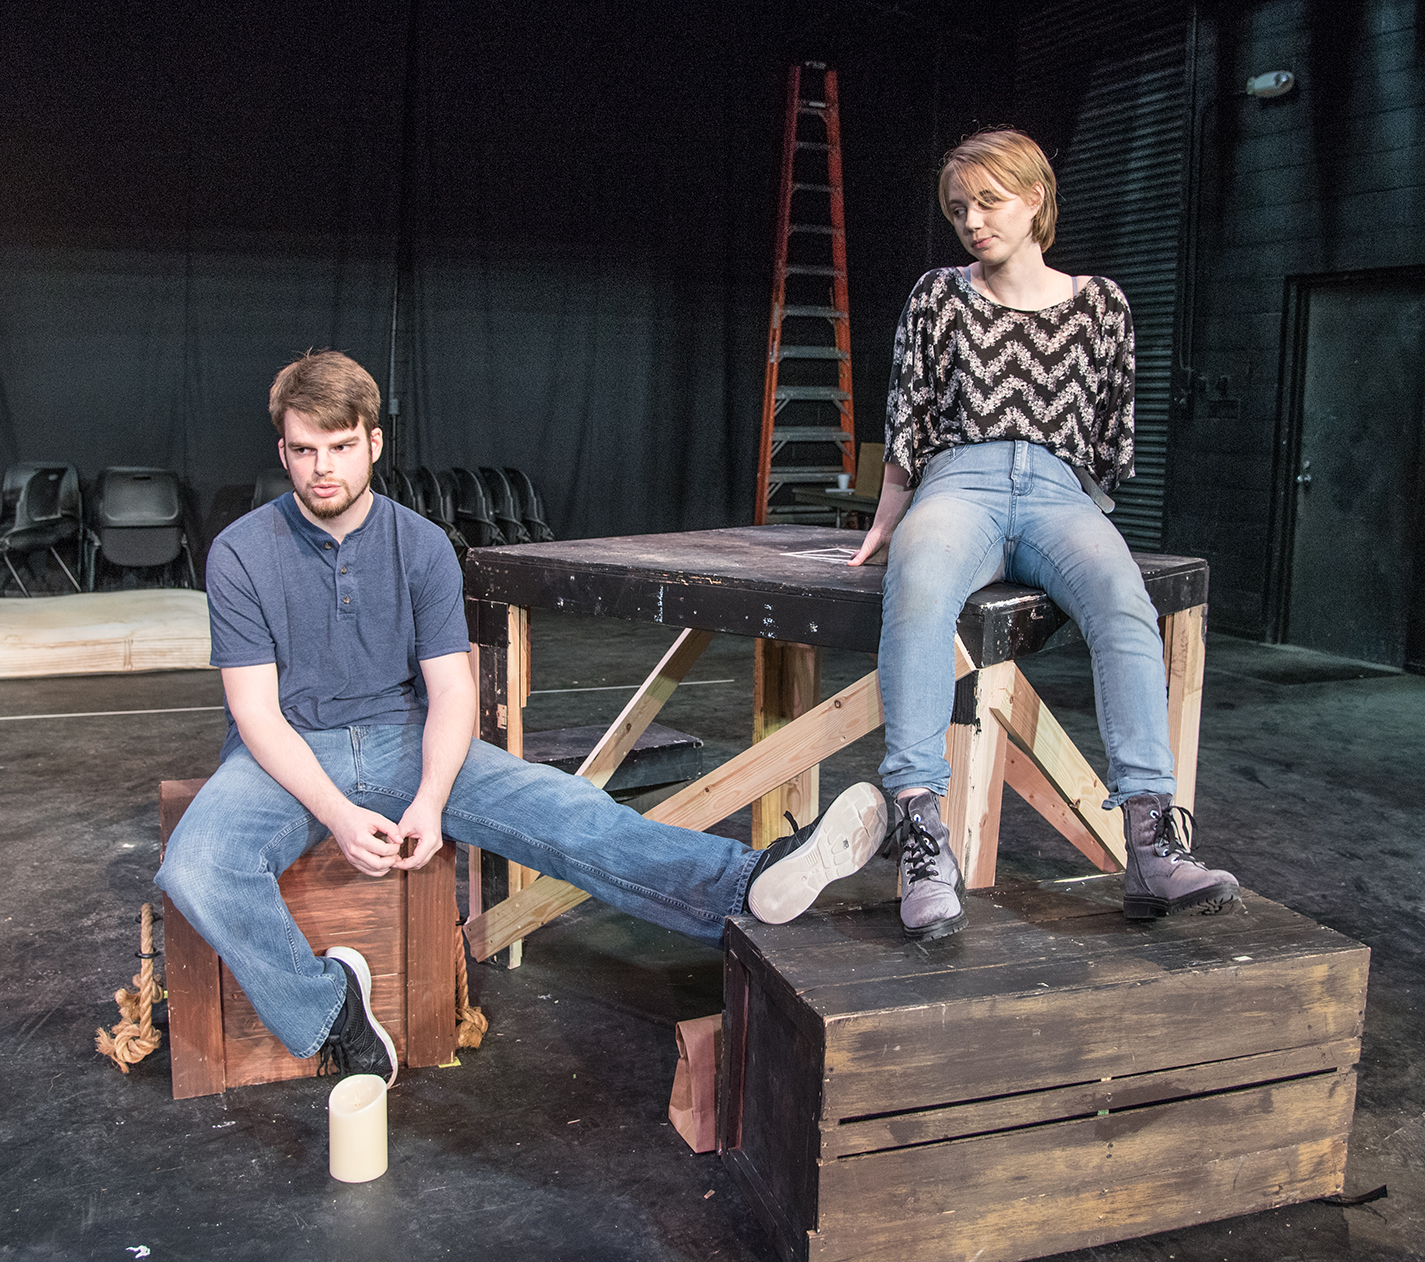 NW student Tavin Bothel portrays Dalton Pace and NW student Lauren Smith portrays Pace Creagan in The Trestle at Pope Lick Creek, which runs in Theatre Northwest April 18-22.